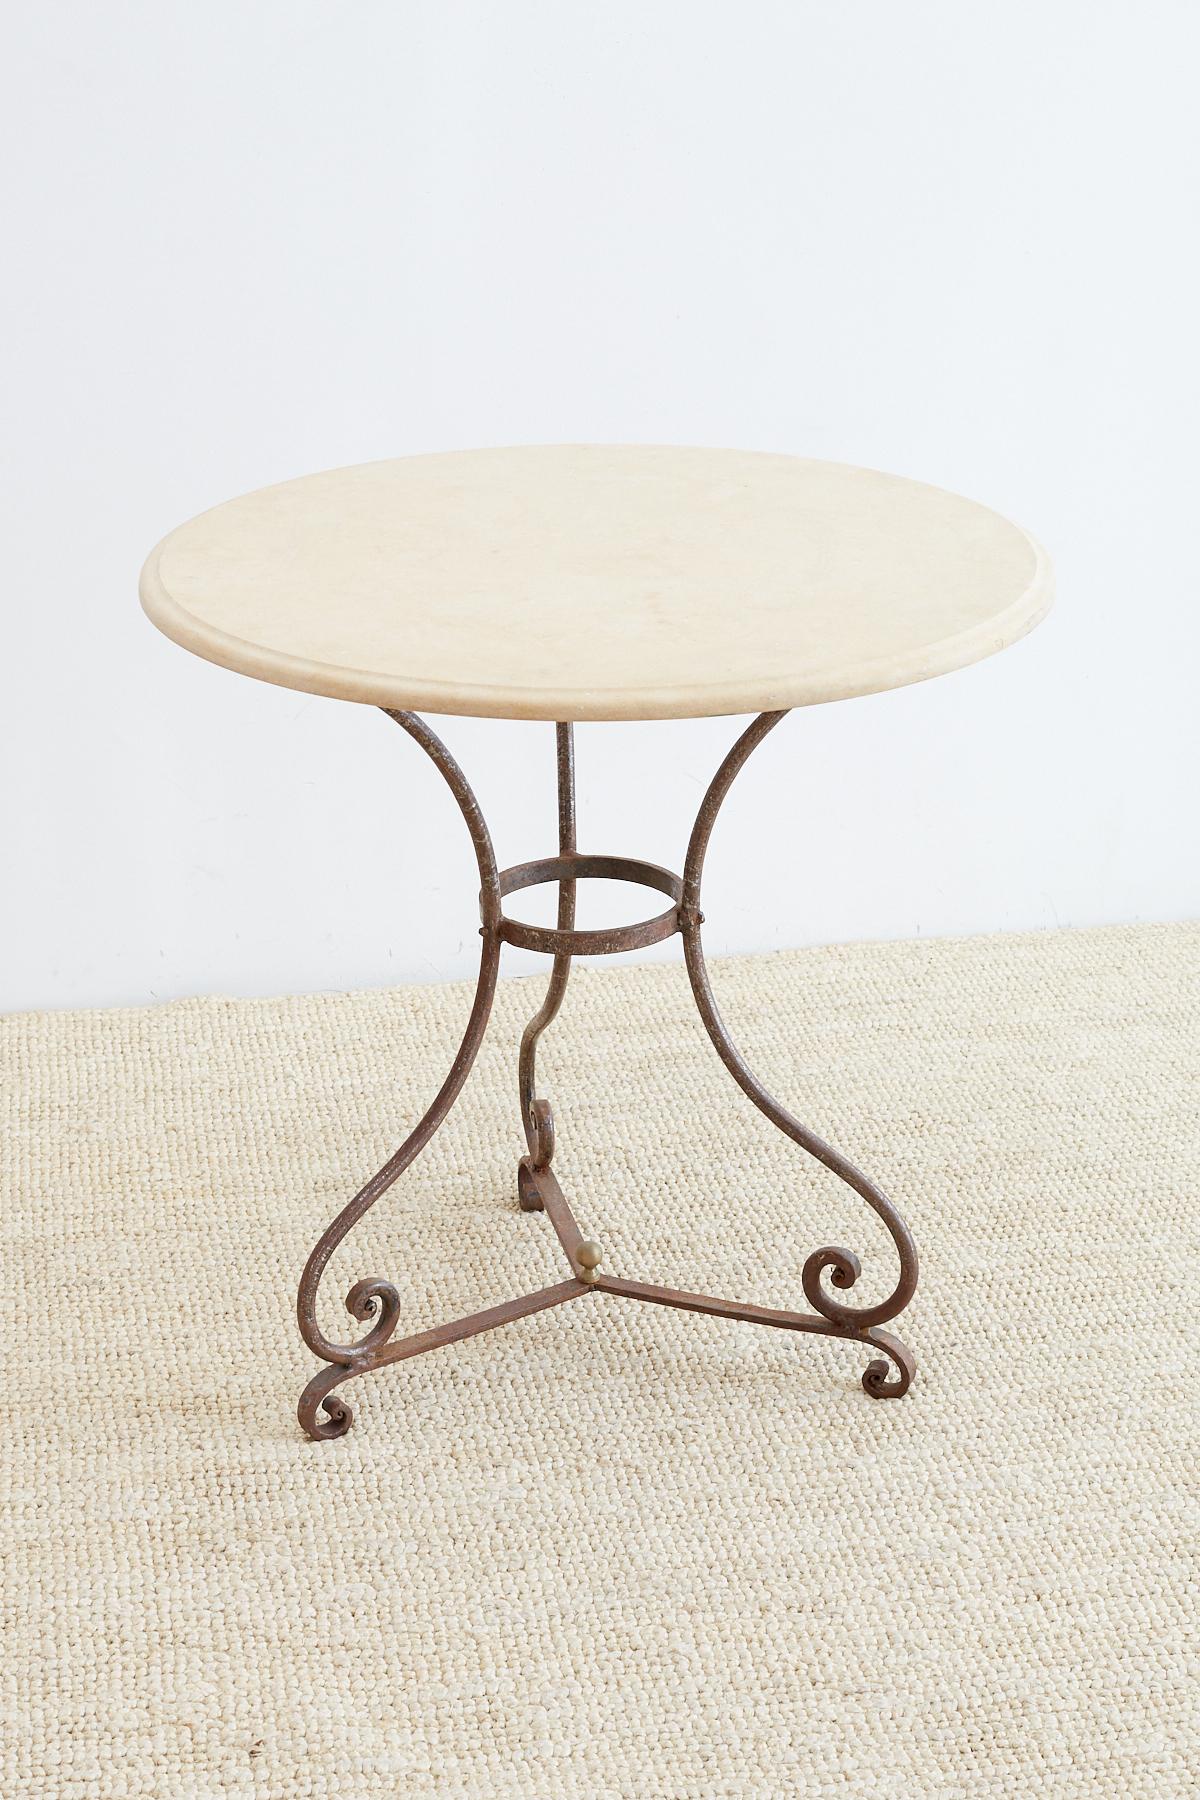 20th Century French Style Stone Top Bistro or Cafe Table